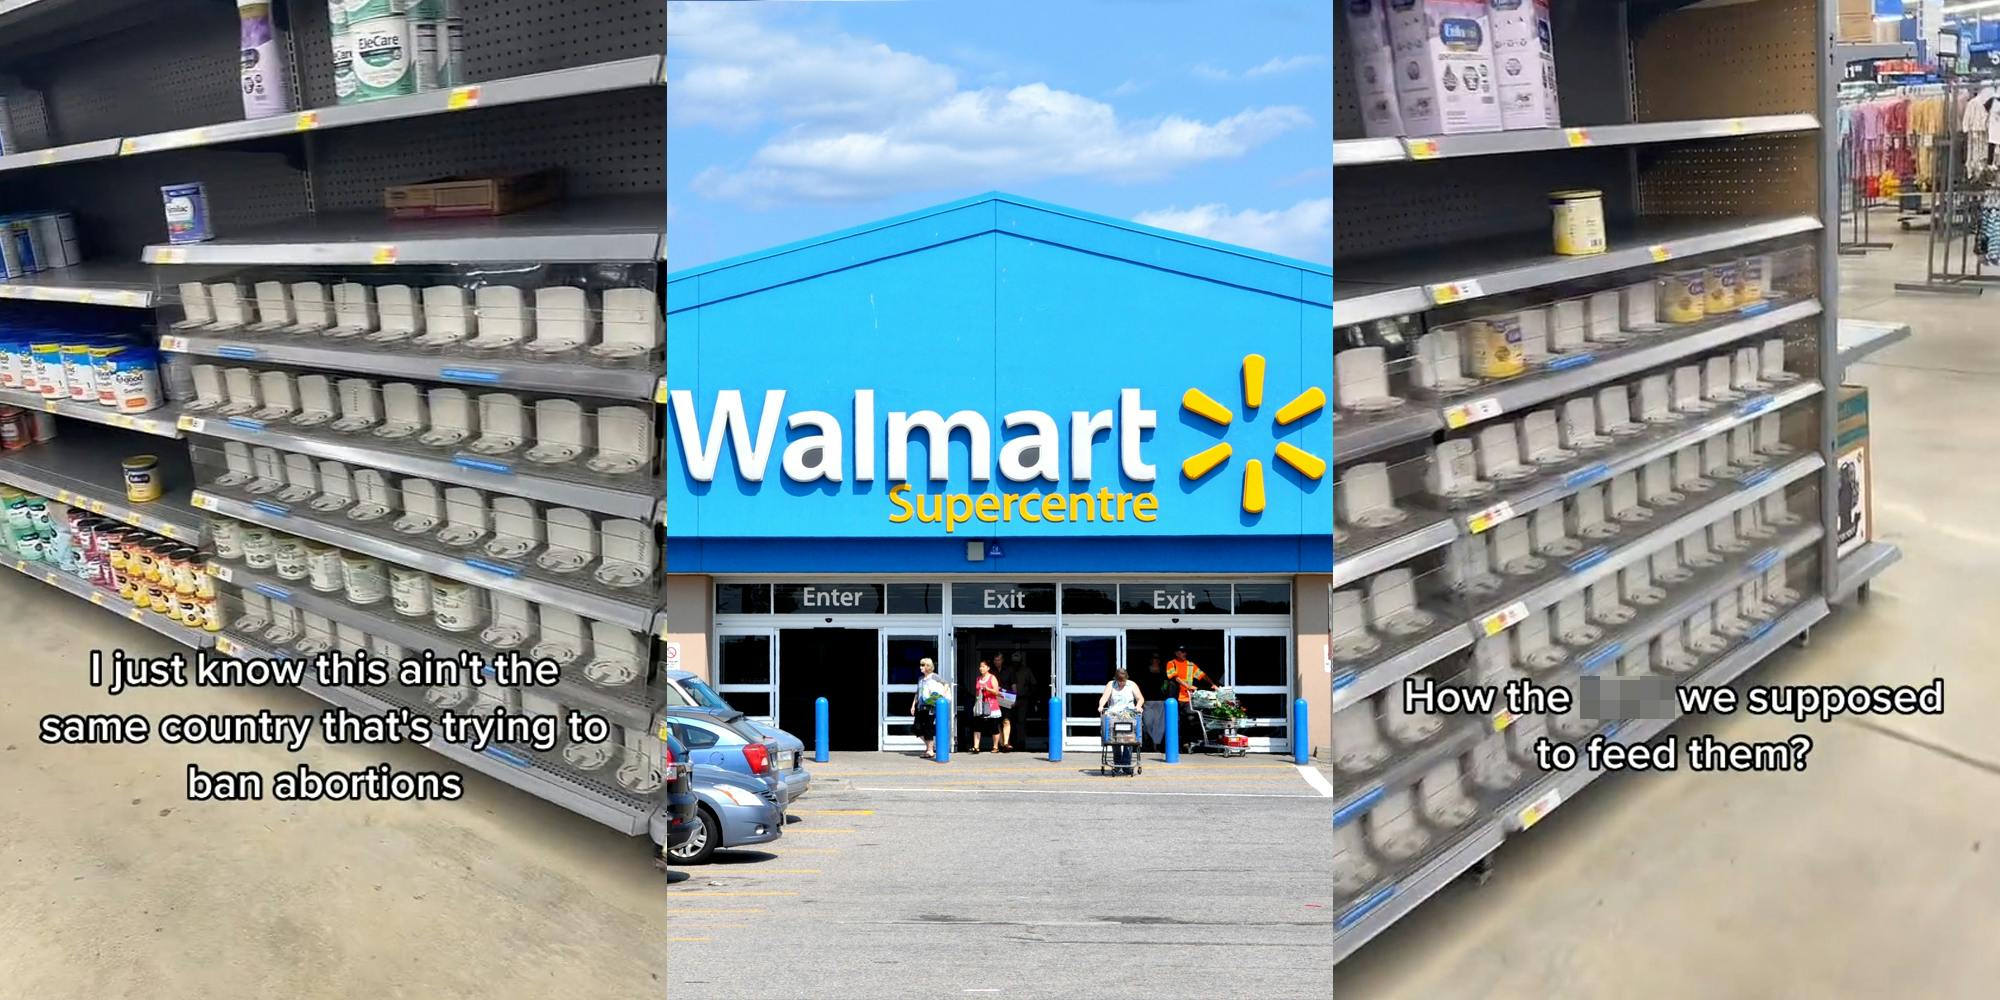 baby formula aisle at Walmart with caption "I just know this ain't the same country that's trying to ban abortions" (l) Walmart sign on Walmart building with blue sky (c) Walmart baby formula aisle with caption "How the blank we supposed to feed them?" (r)